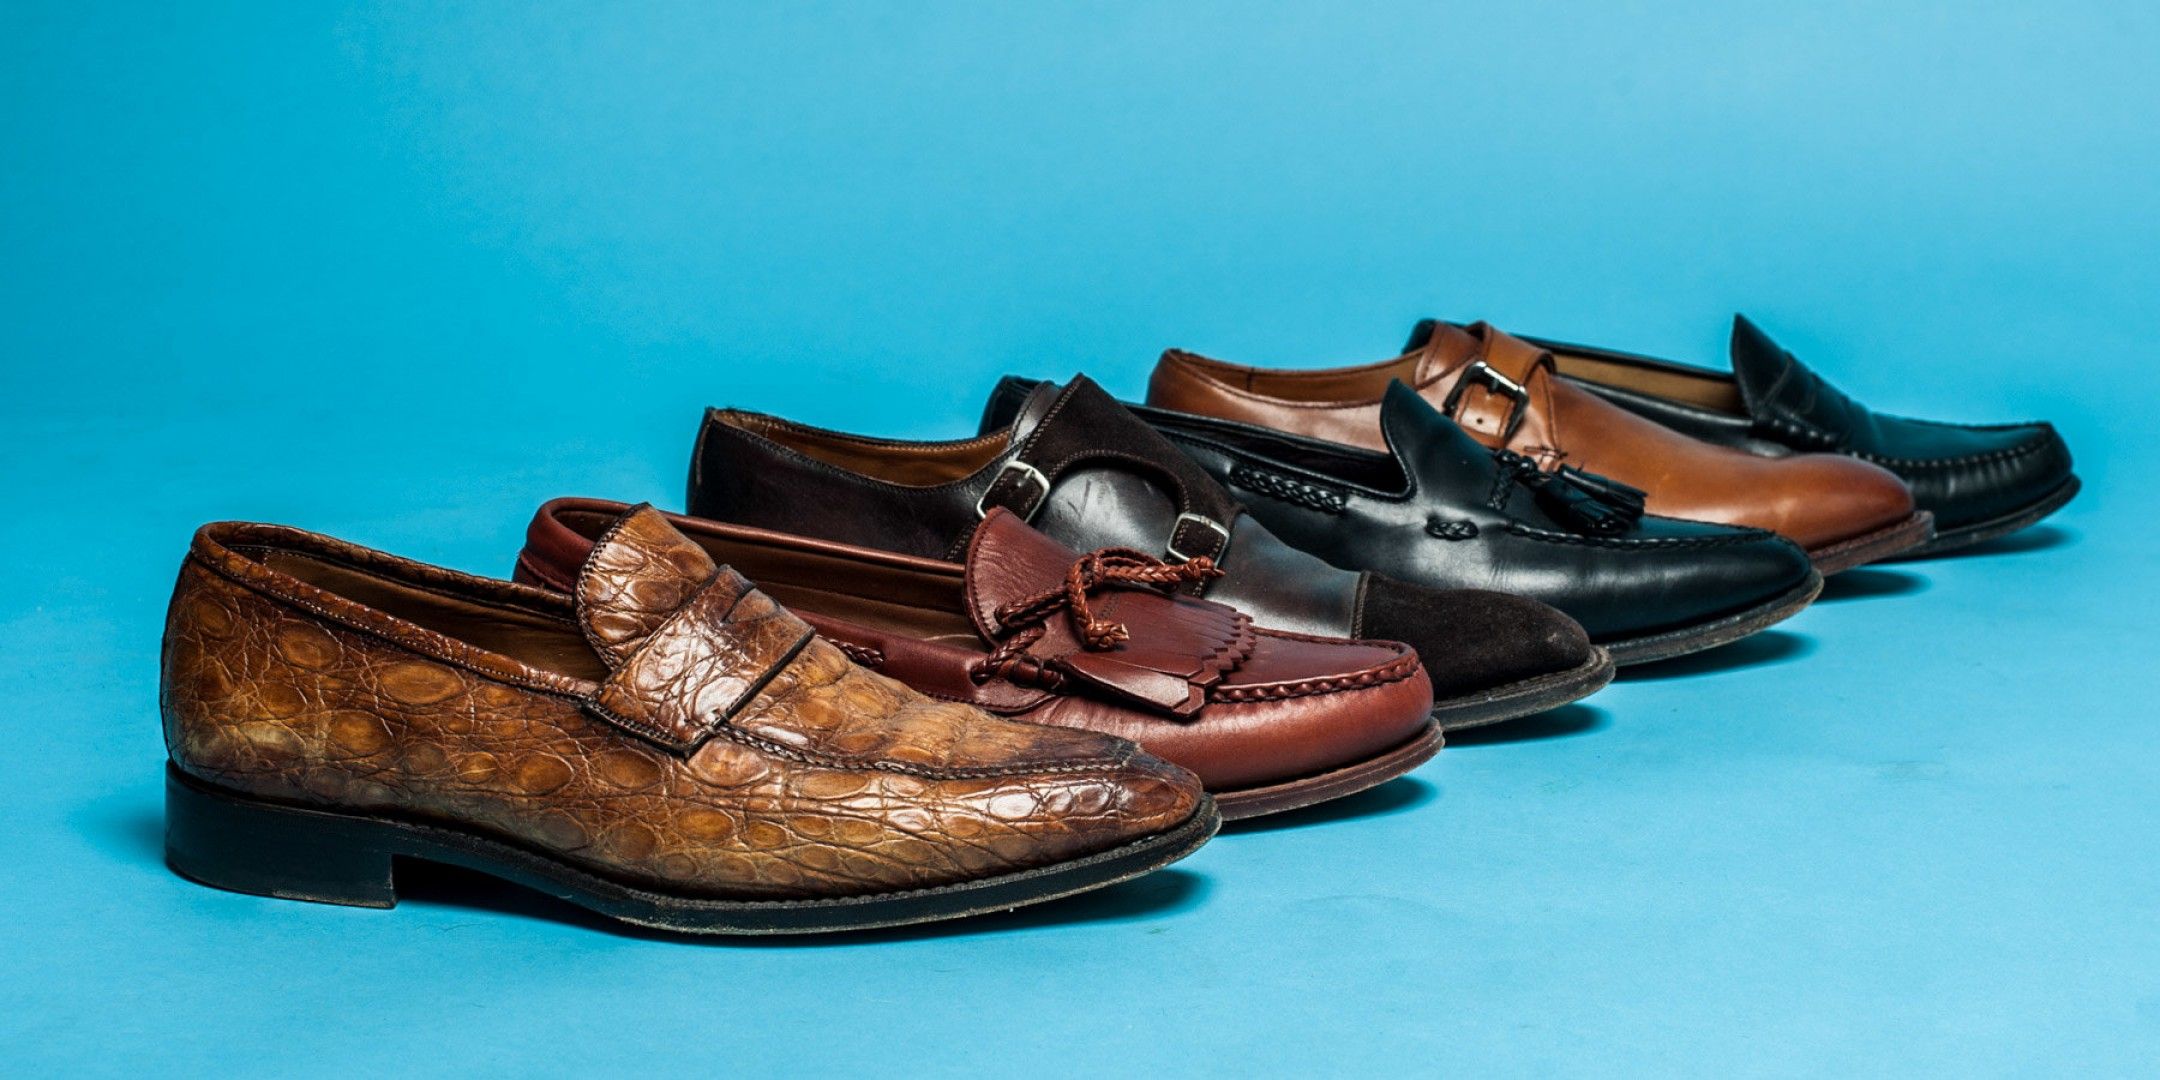 Men's Dress Shoe Styles What to Wear When for Work and Special Occasions